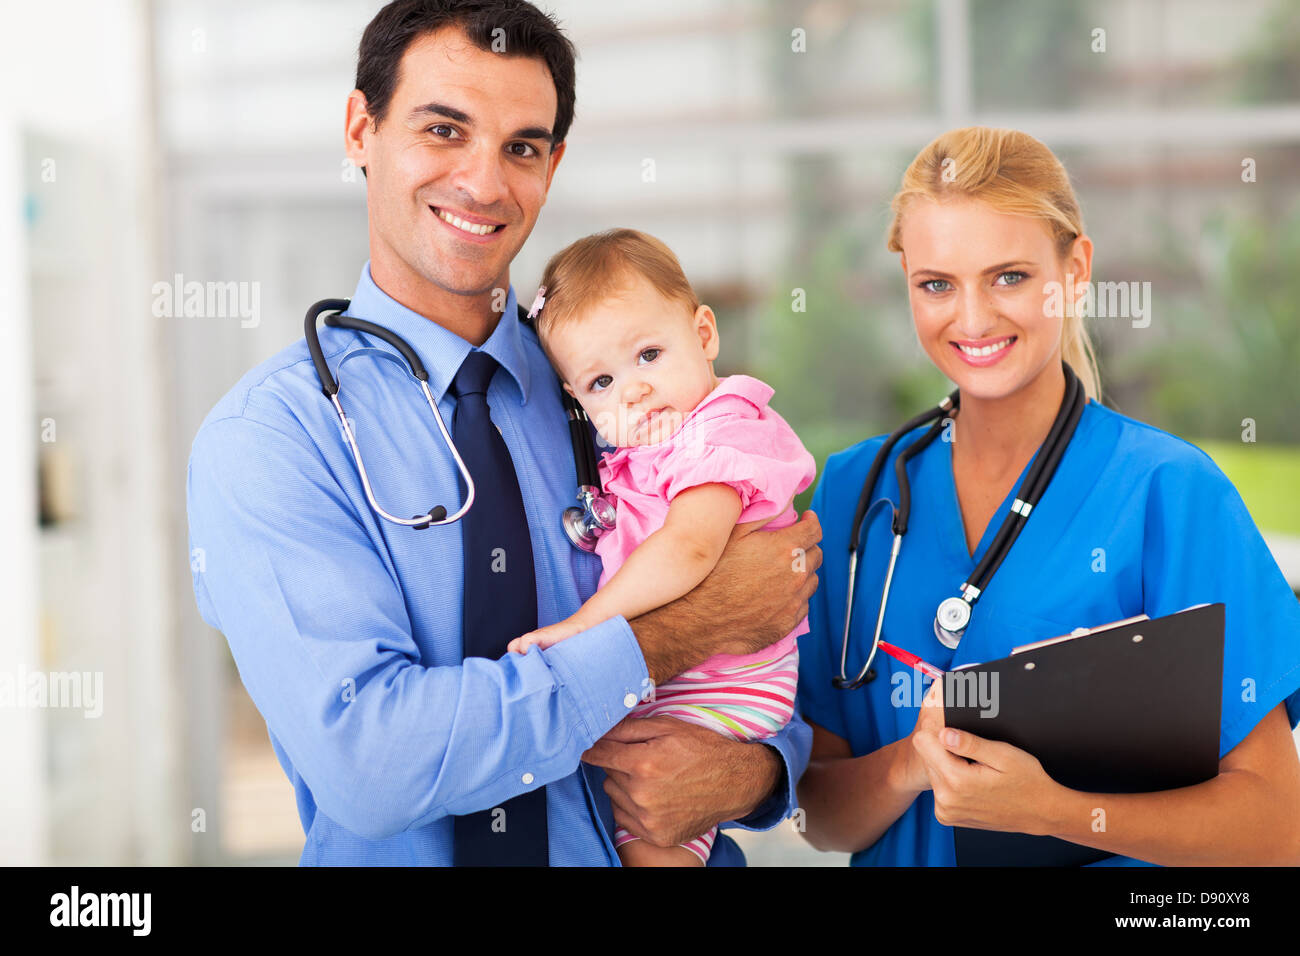 smiling pediatric doctor and nurse with baby girl Stock Photo